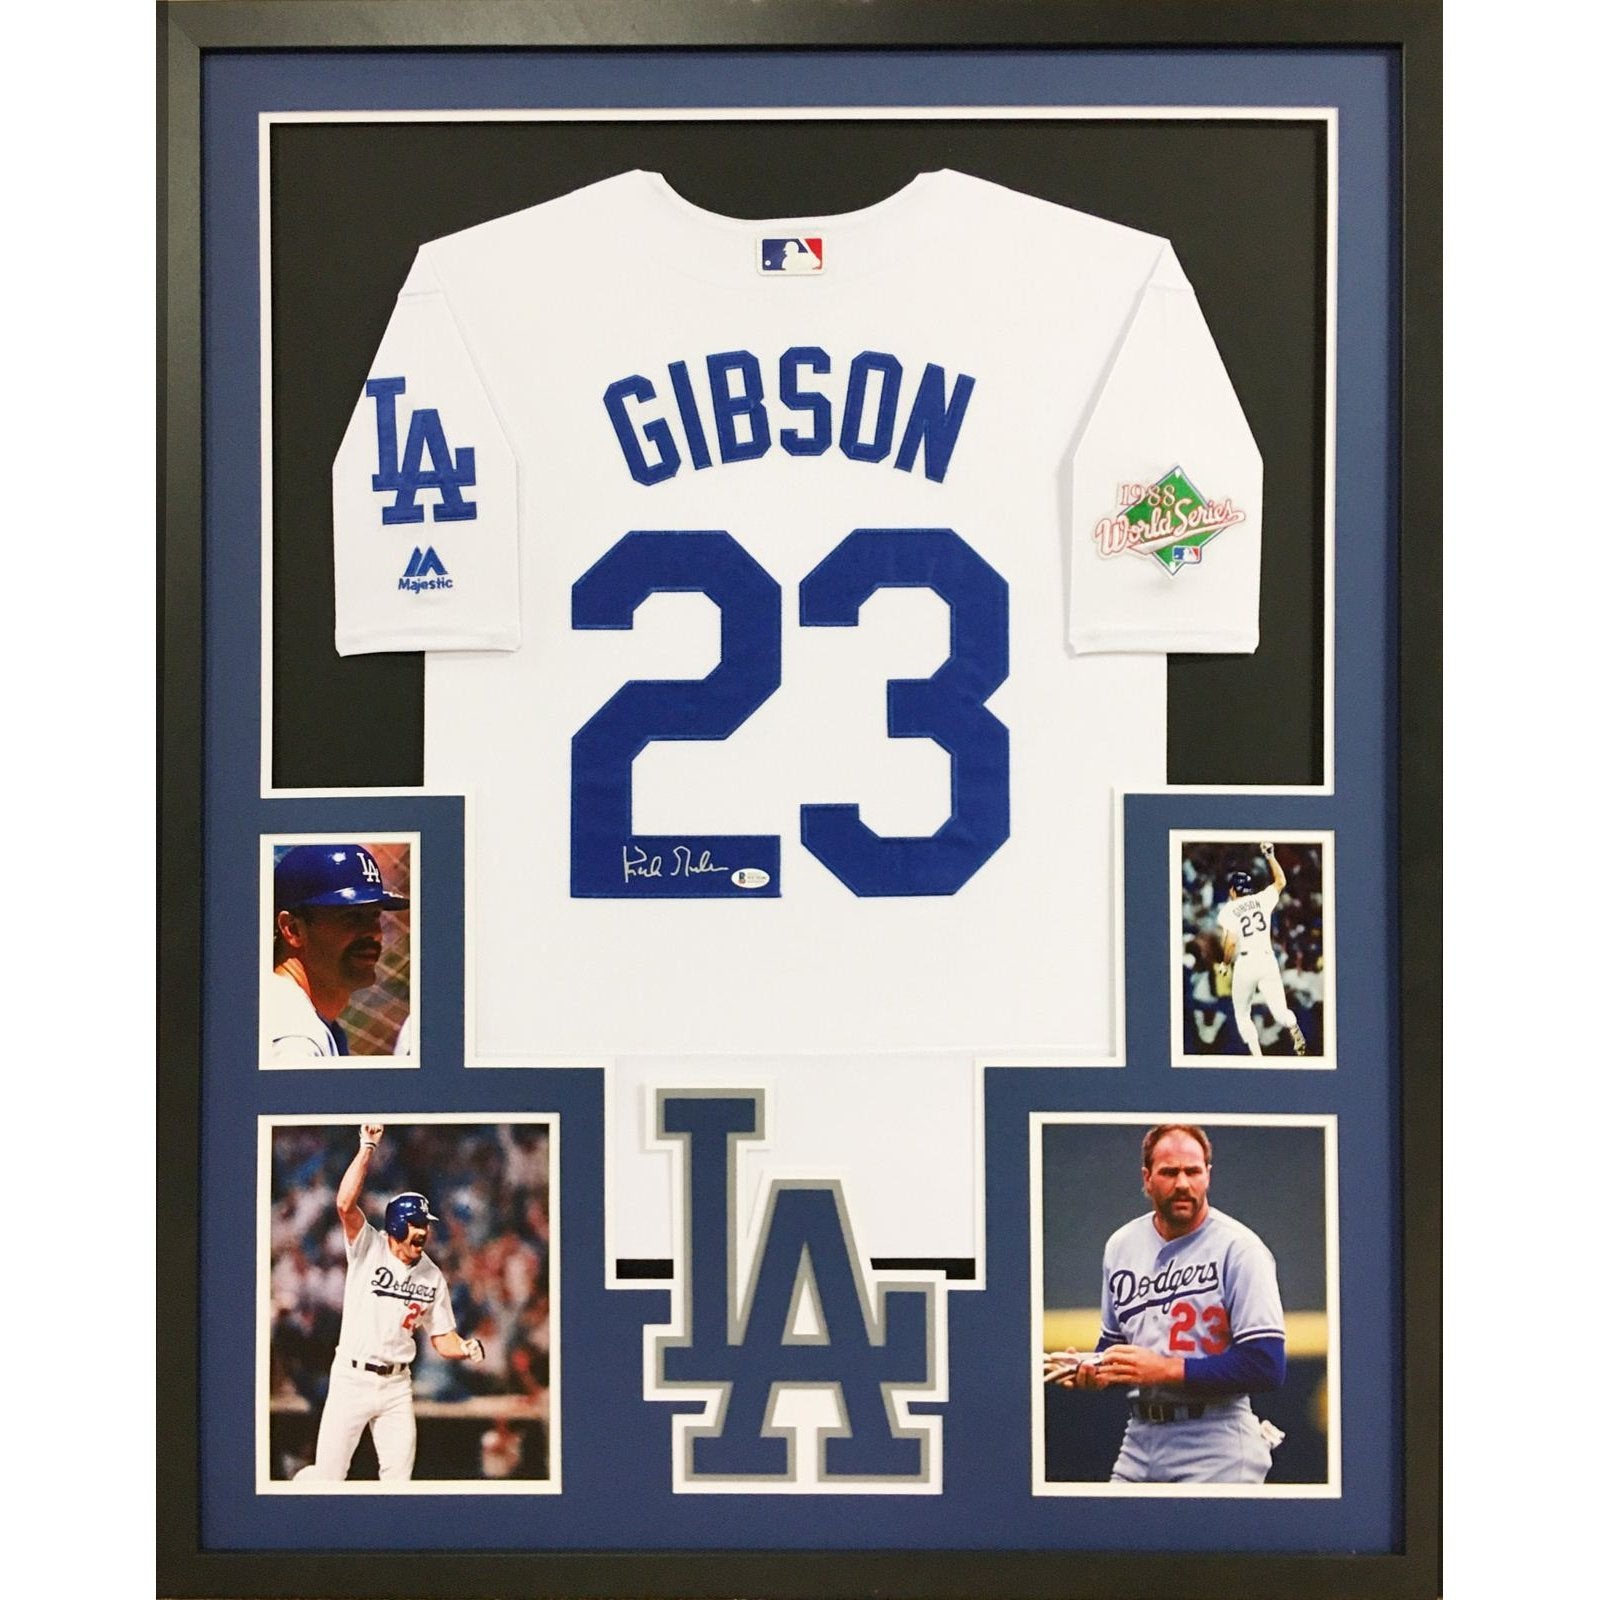 kirk gibson jersey products for sale